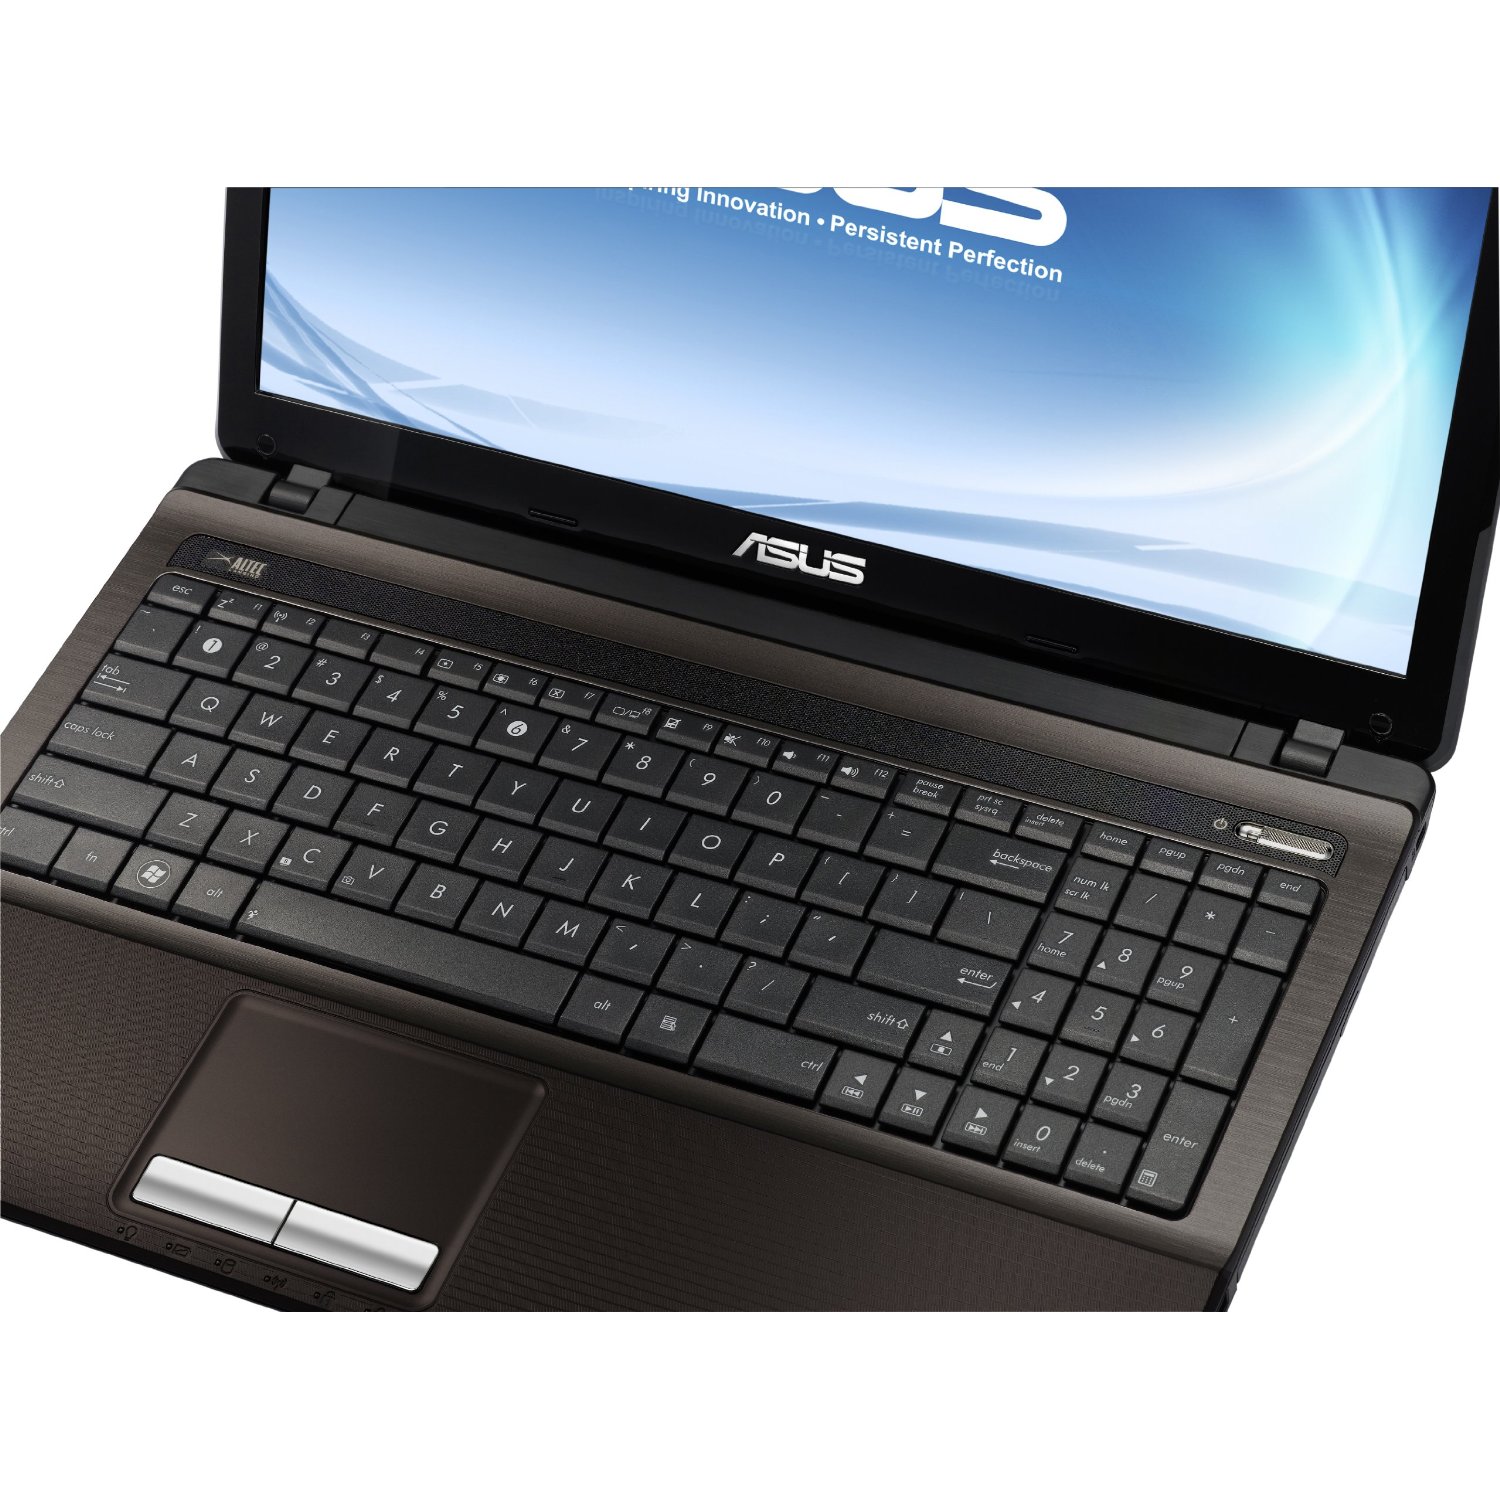 http://thetechjournal.com/wp-content/uploads/images/1203/1332652603-asus-a53ues01-156inch-laptop-7.jpg